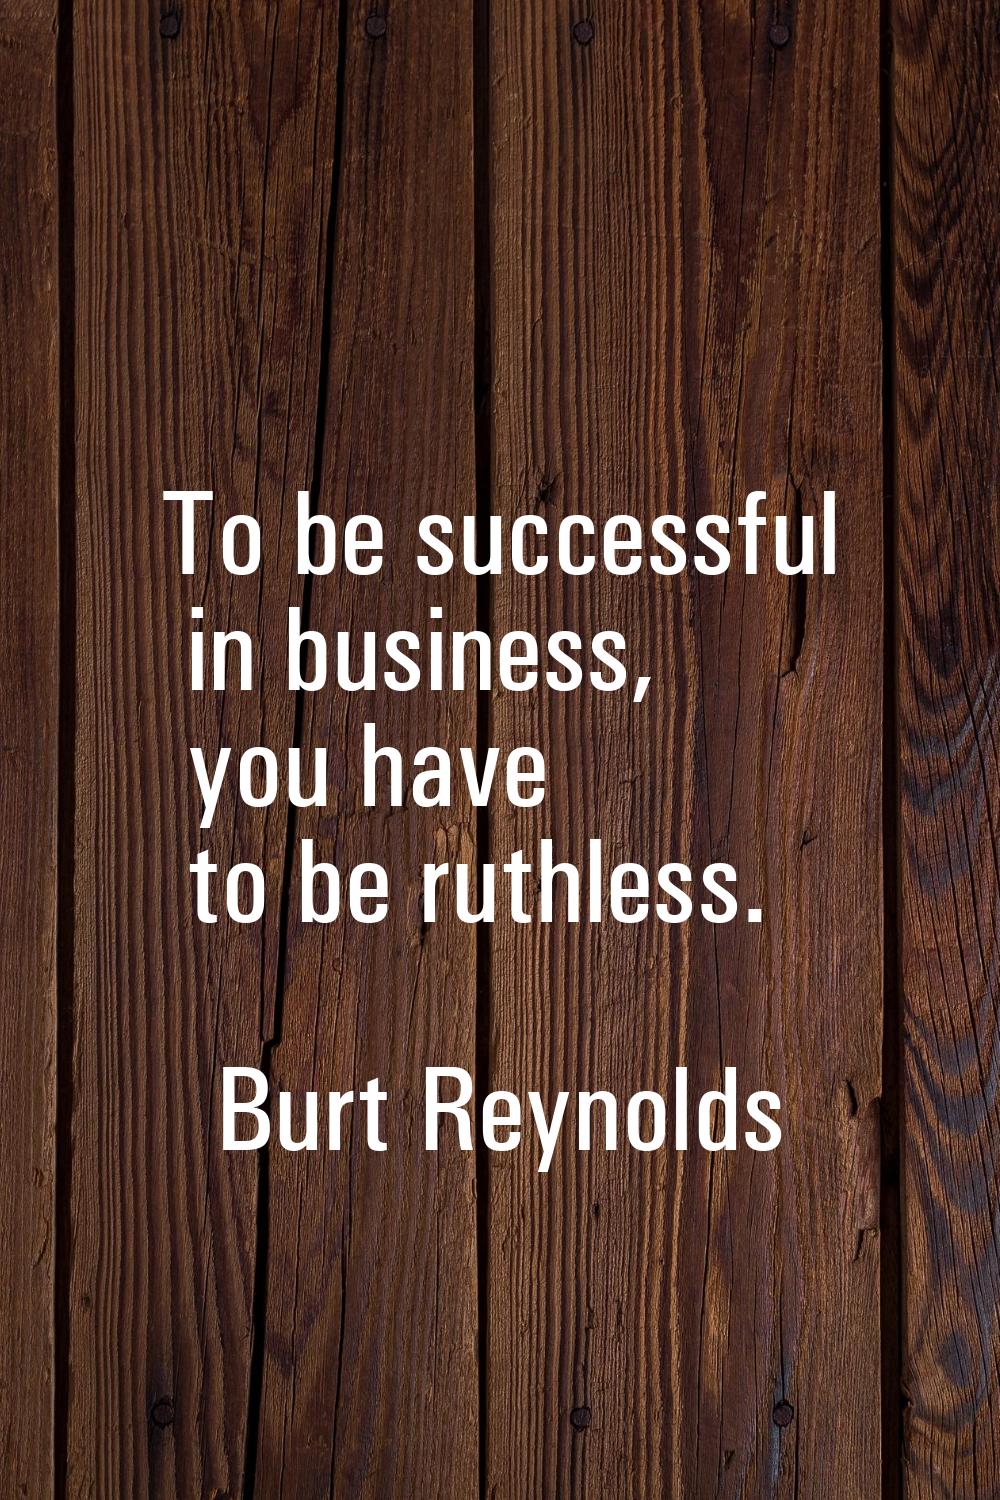 To be successful in business, you have to be ruthless.